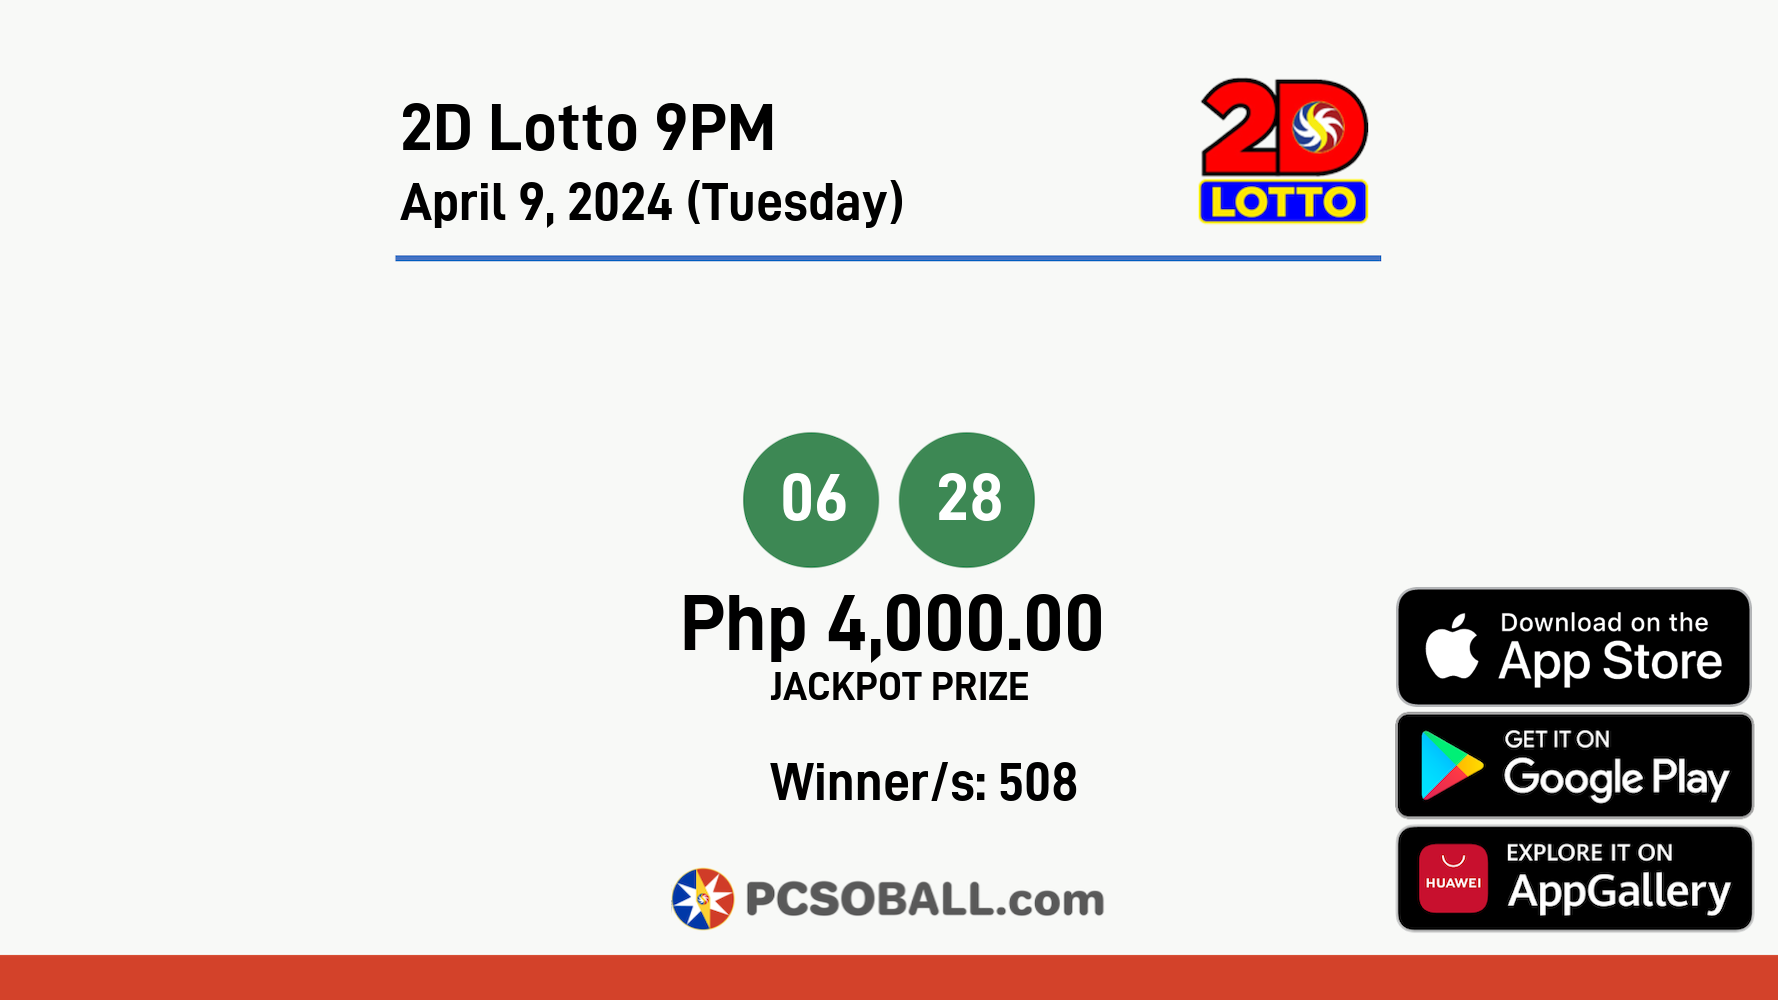 2D Lotto 9PM April 9, 2024 (Tuesday) Result